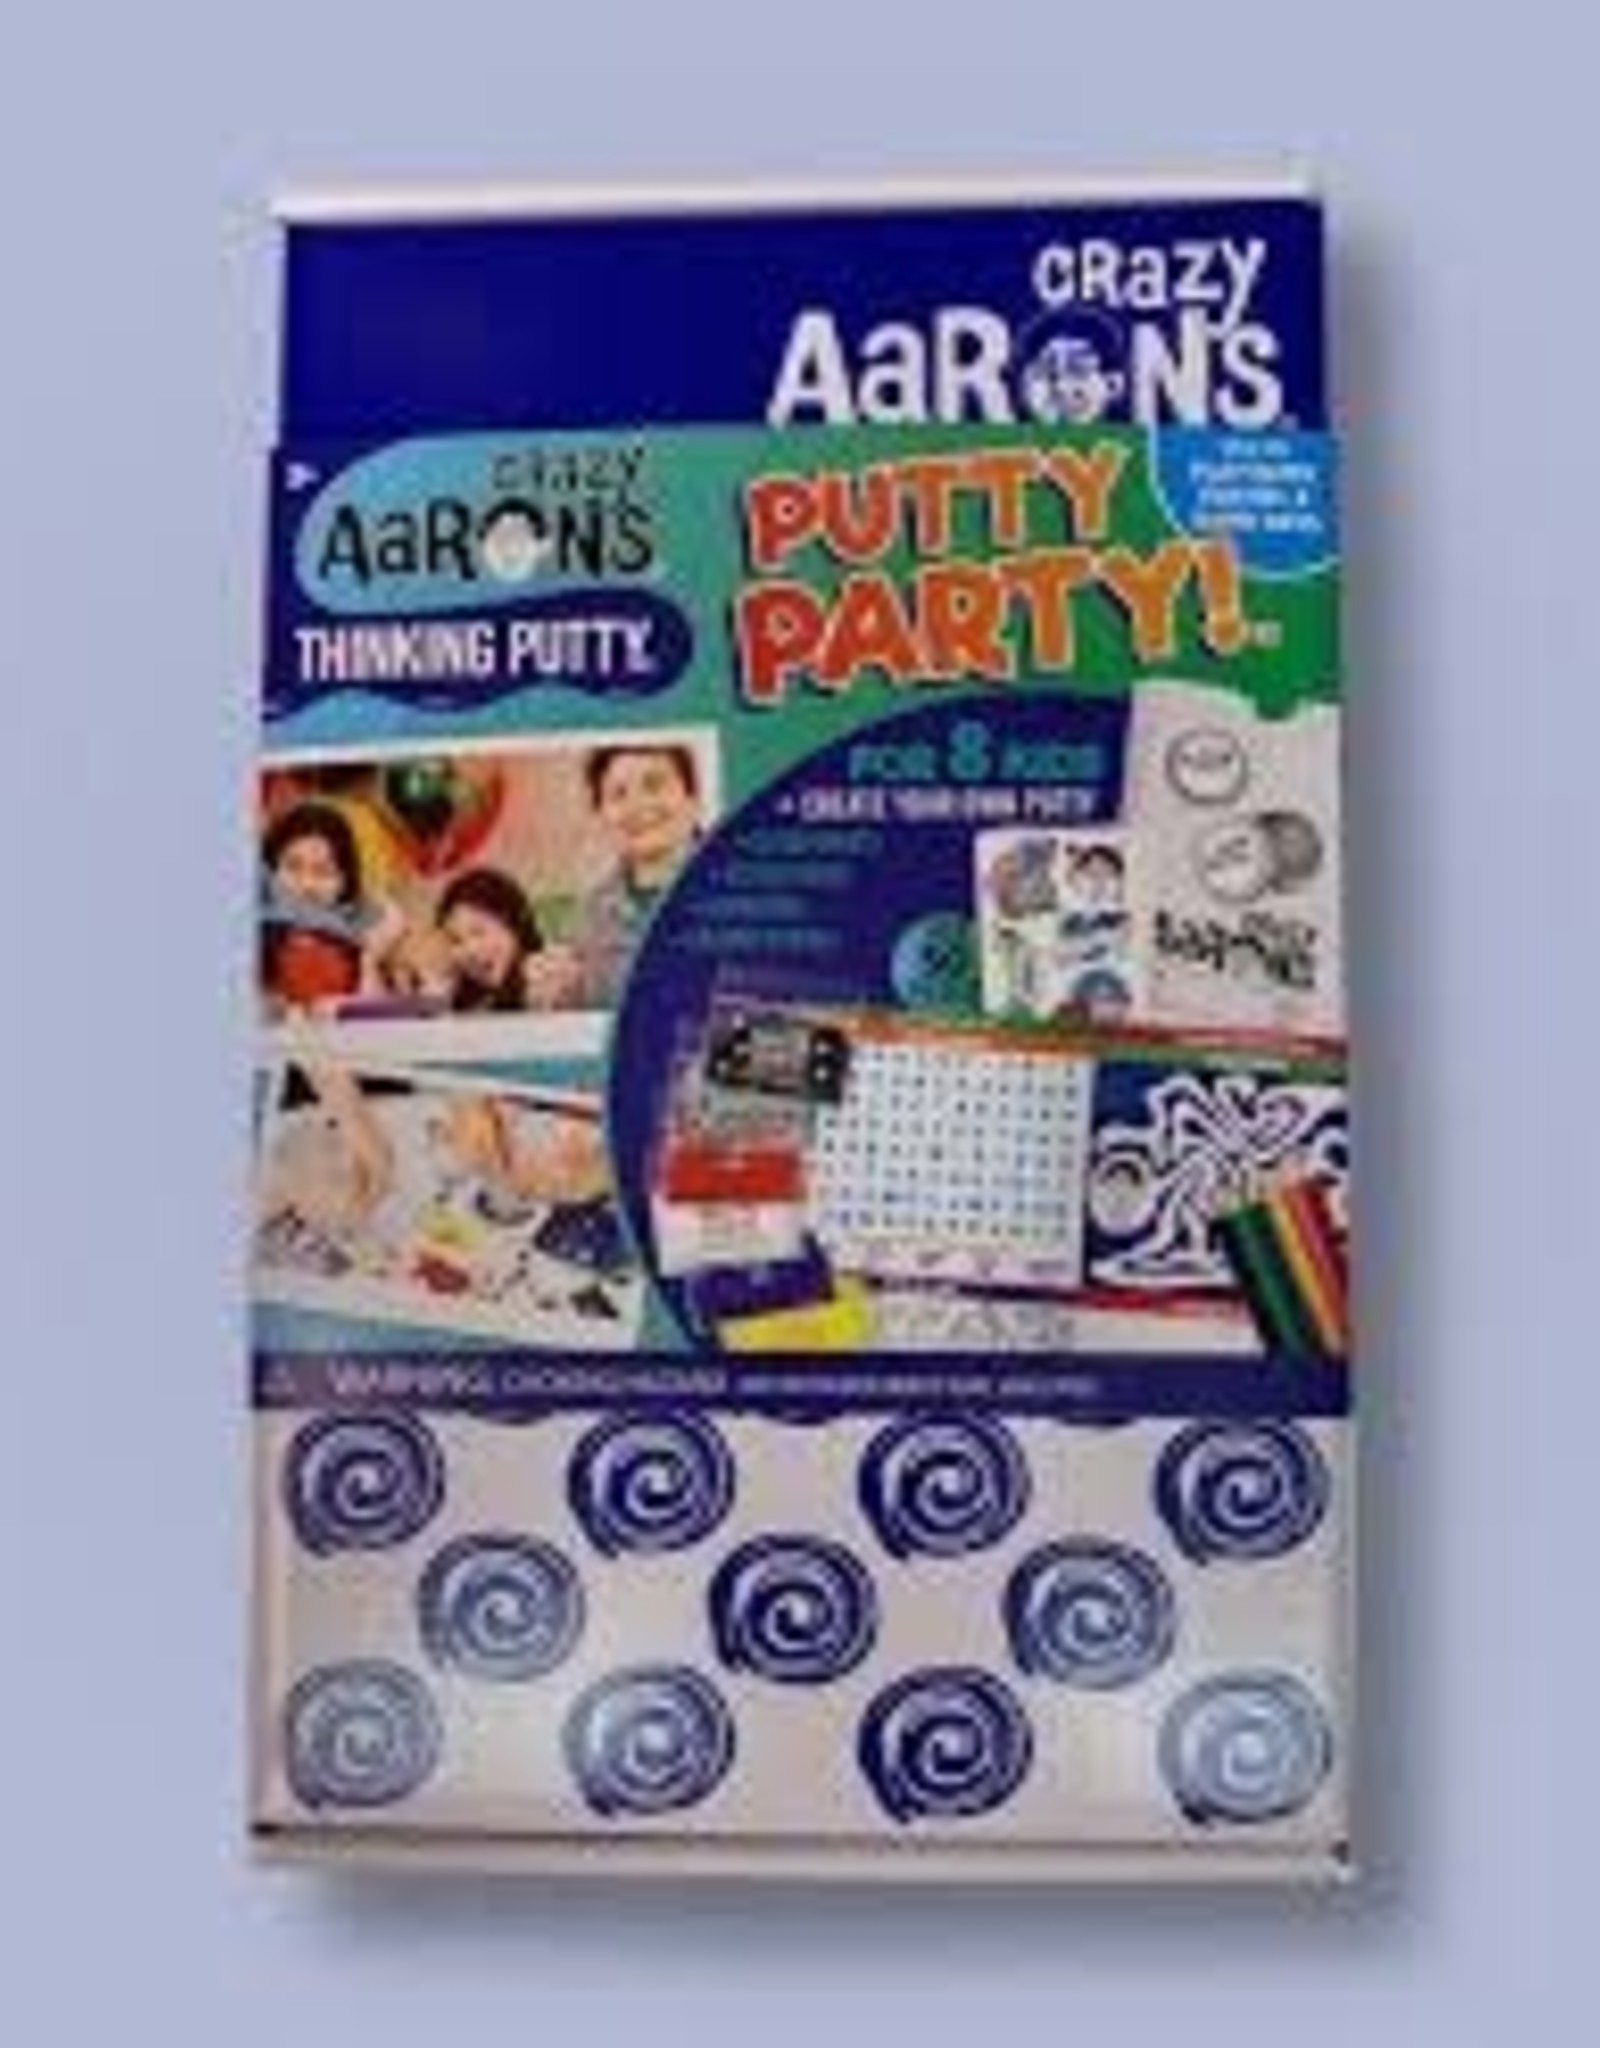 Crazy Aaron's Thinking Putty Putty Party